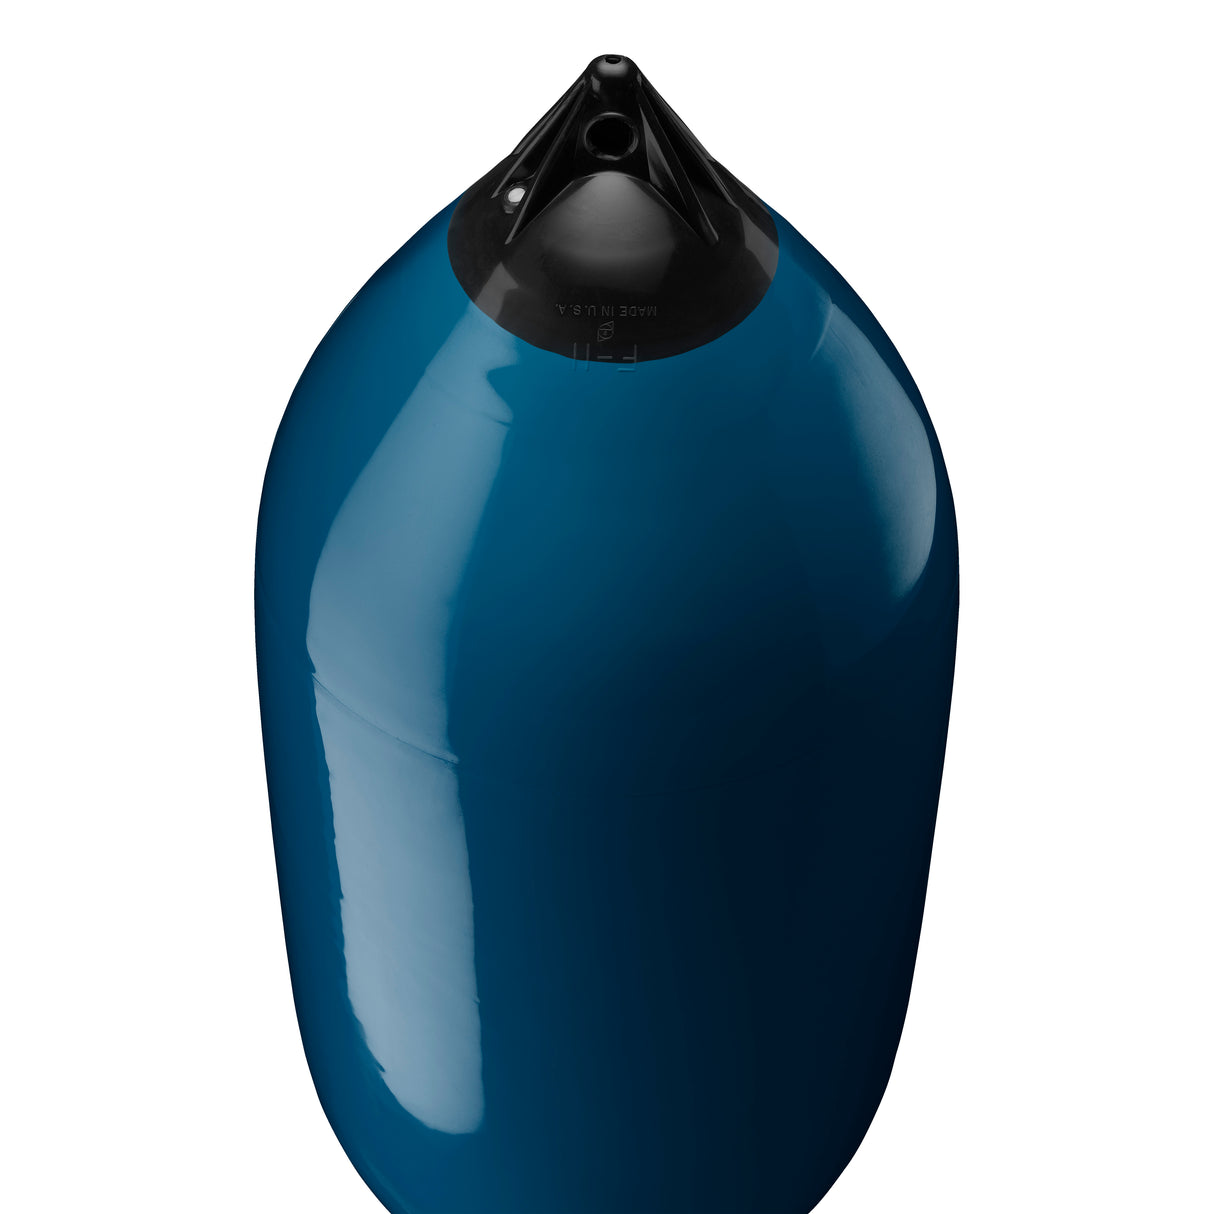 Catalina Blue boat fender with Navy-Top, Polyform F-11 angled shot